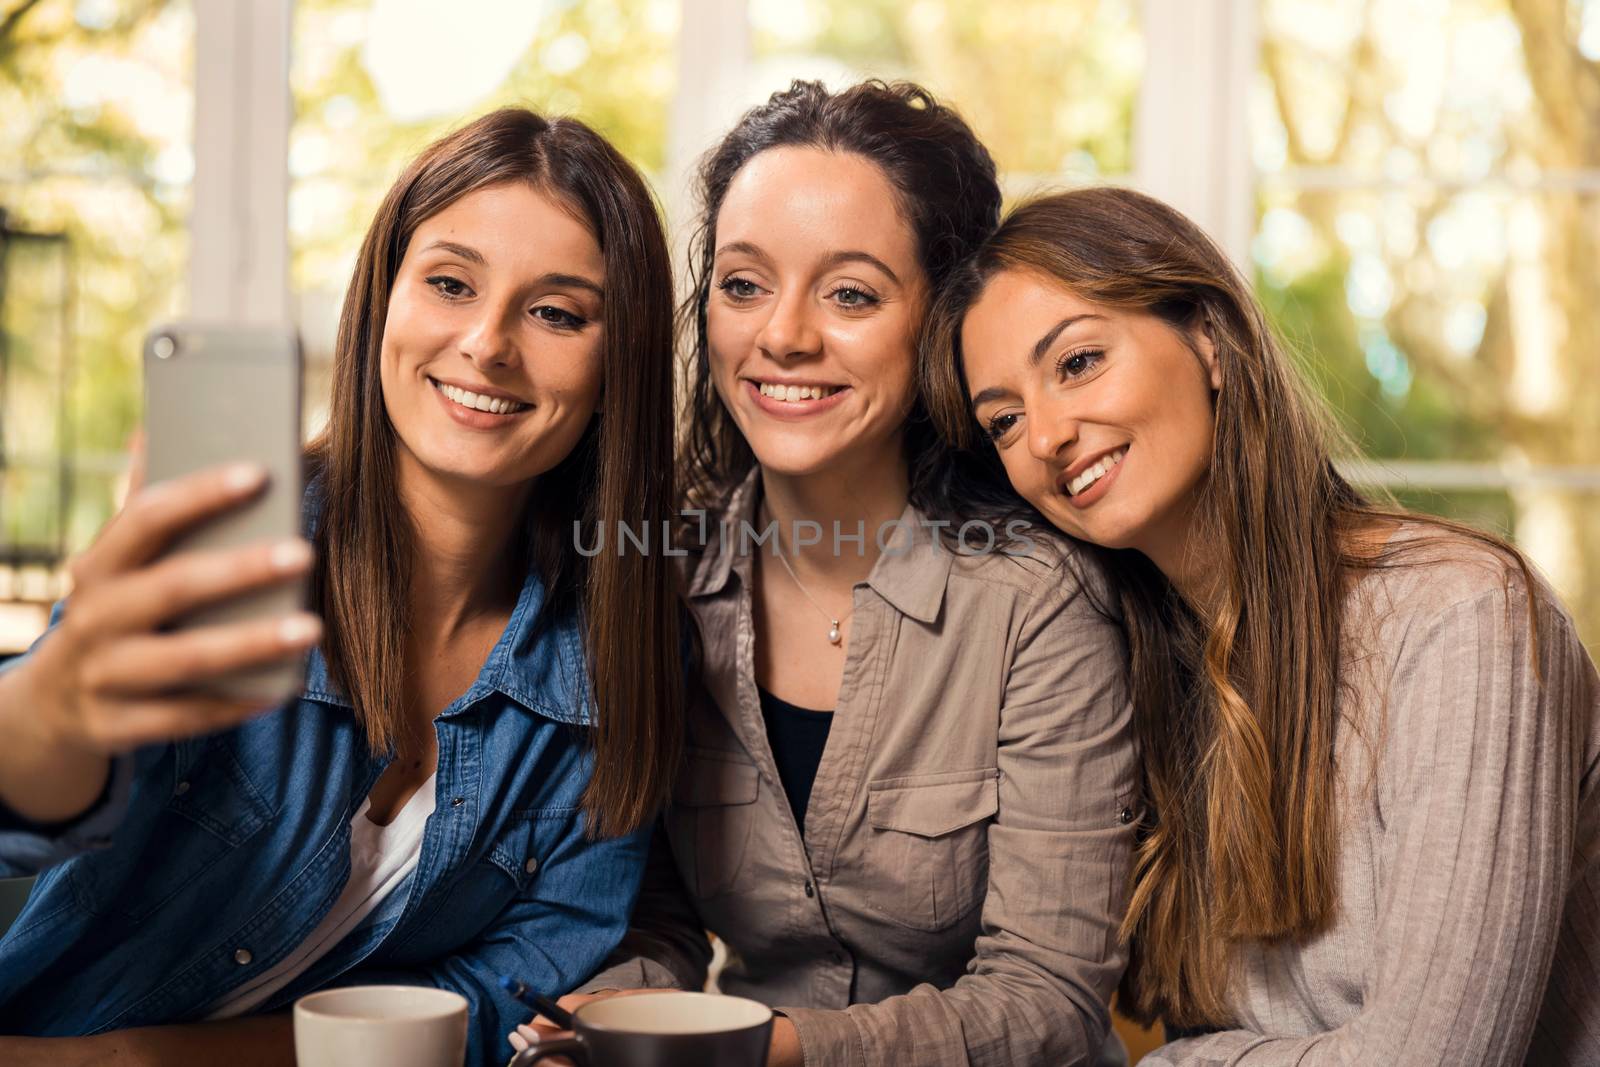 Groups of female firends making a selfie during a pause on the studies